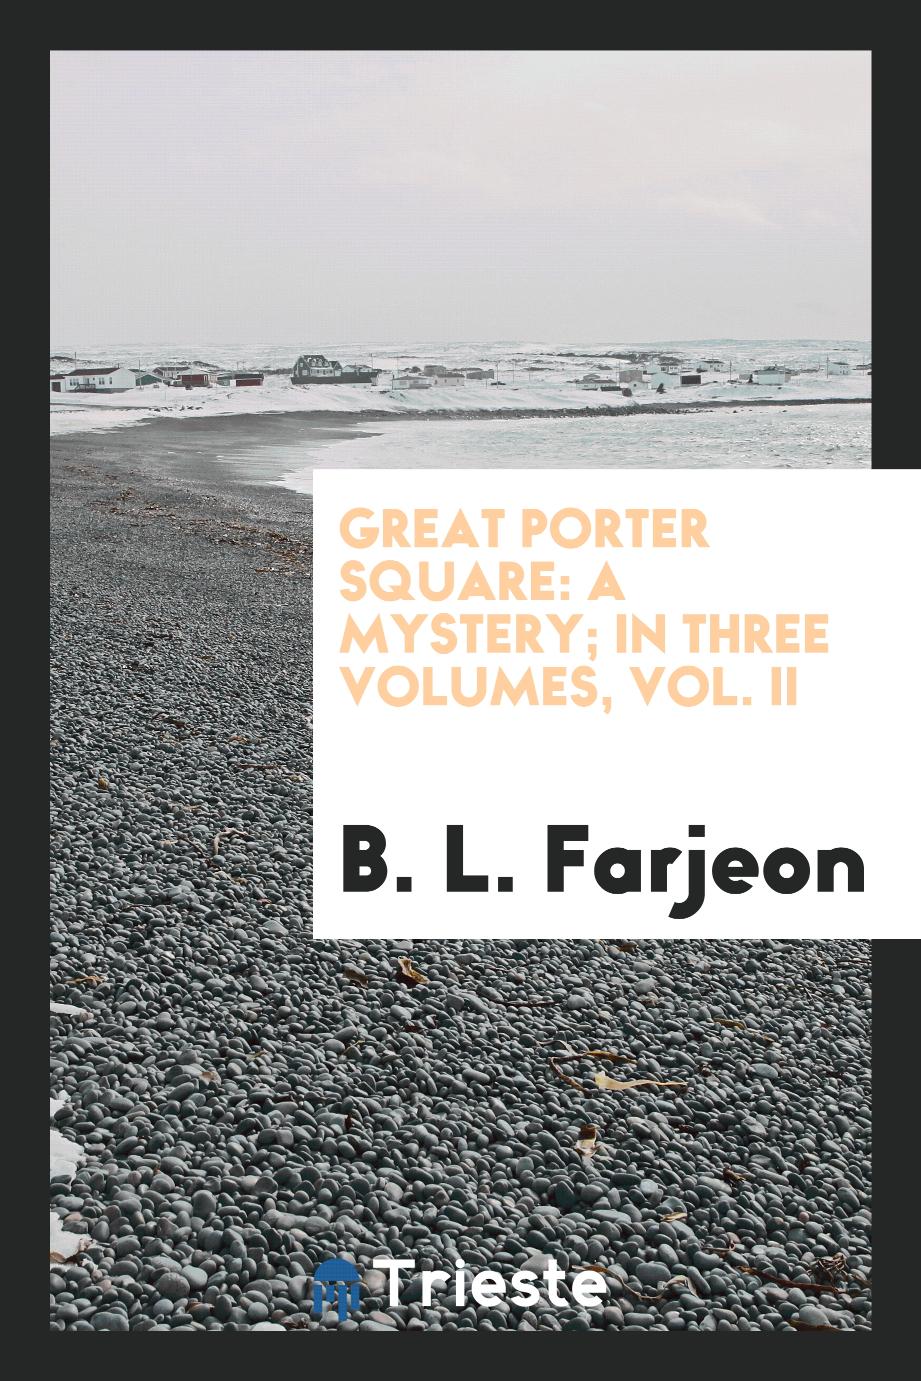 Great Porter square: a mystery; In Three Volumes, Vol. II